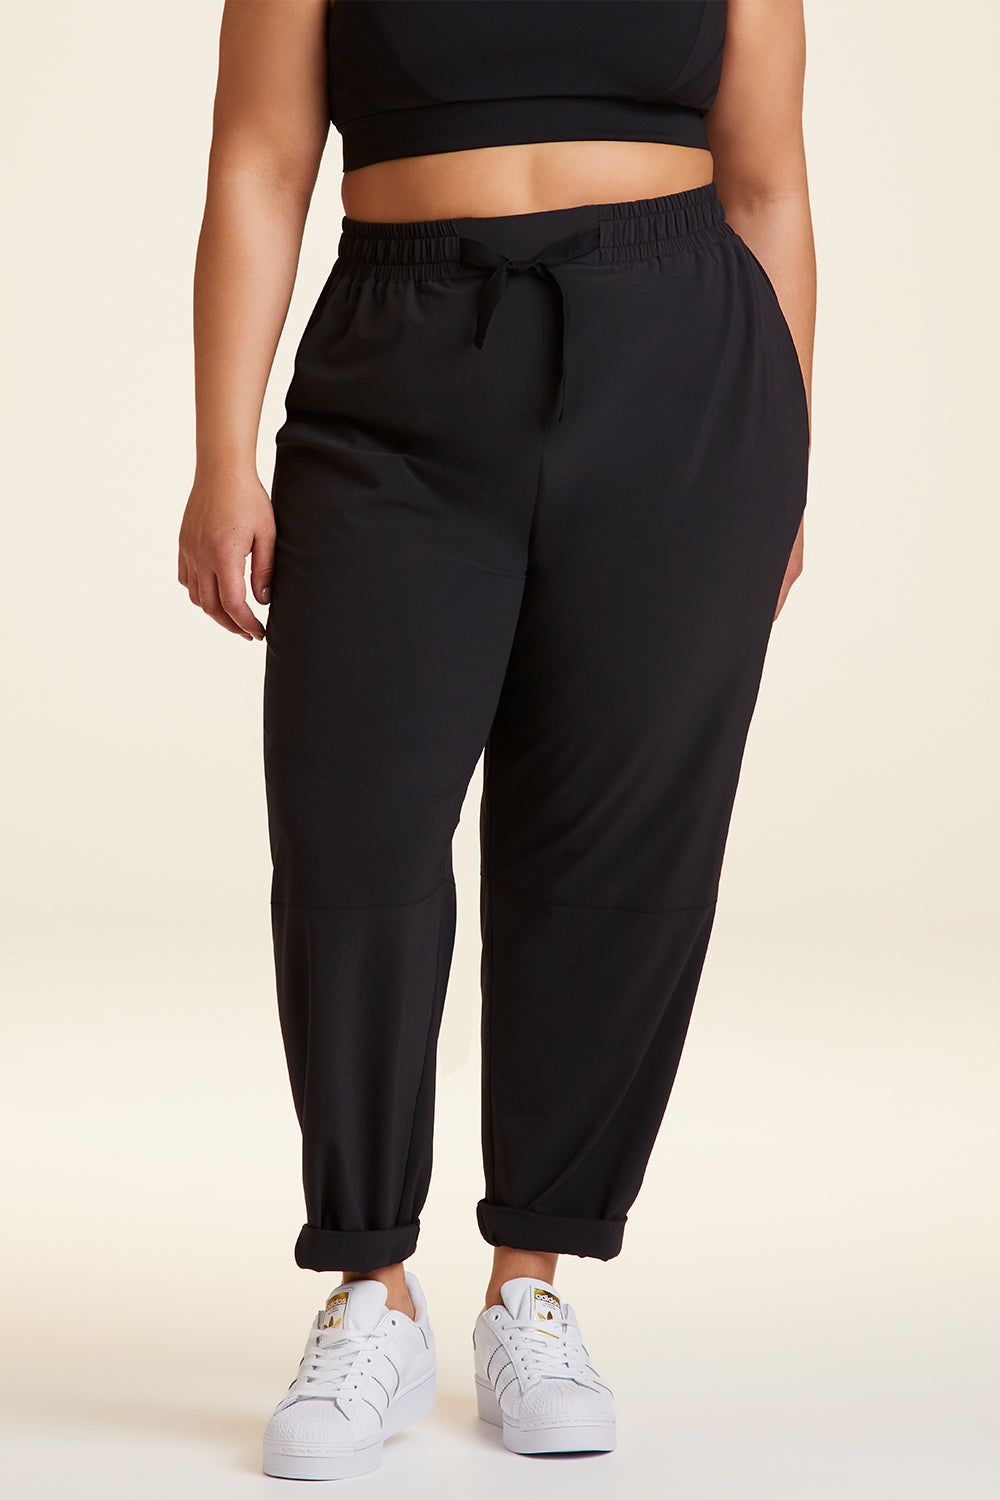 Best Offers on Black trouser women upto 20-71% off - Limited